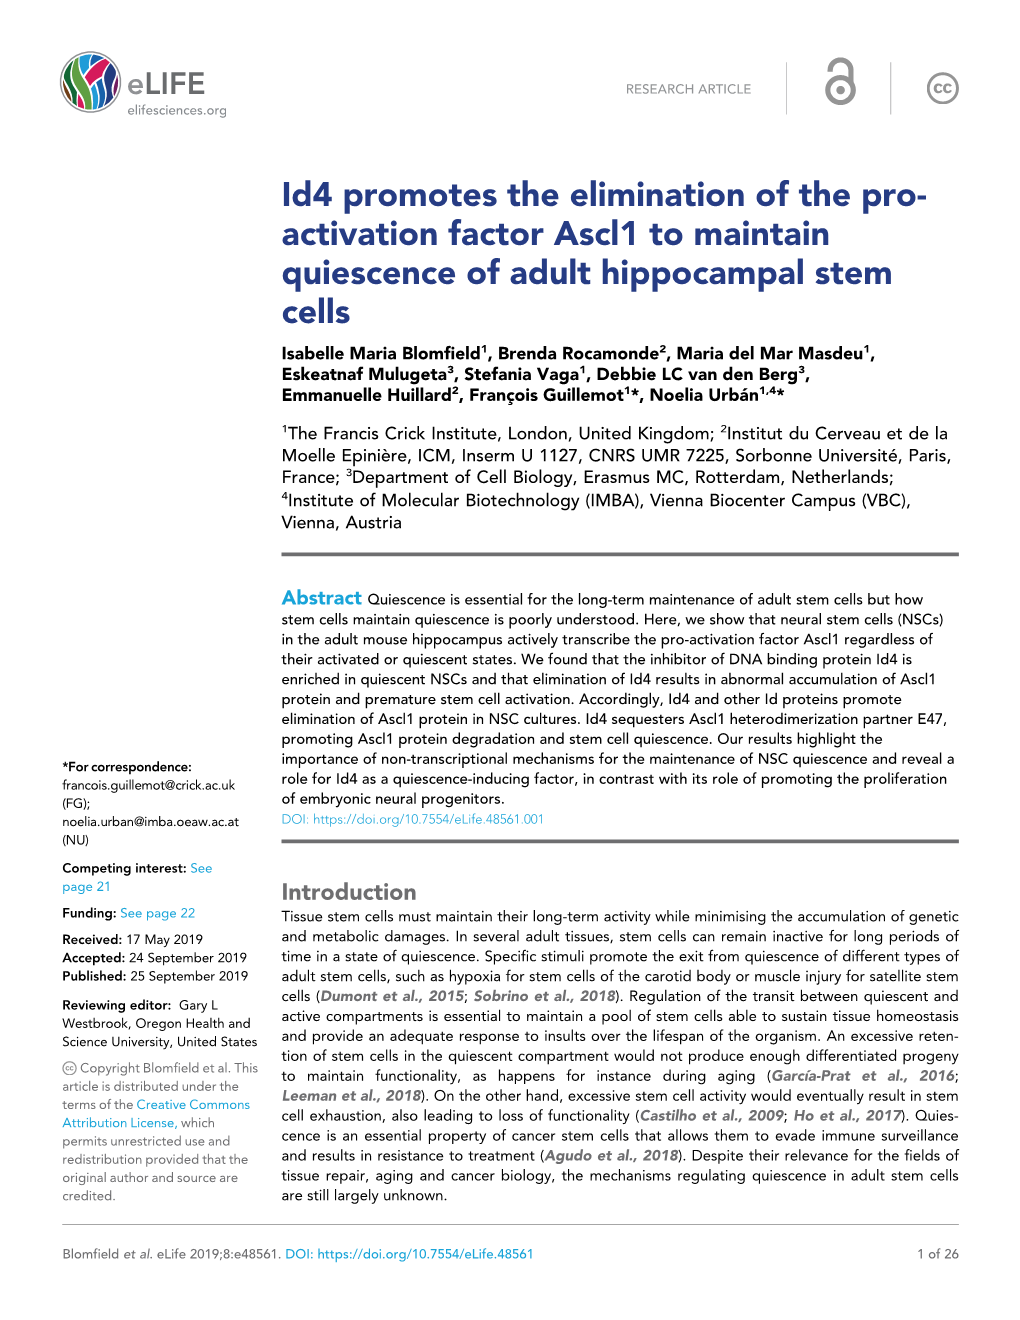 Id4 Promotes the Elimination of the Pro- Activation Factor Ascl1 to Maintain